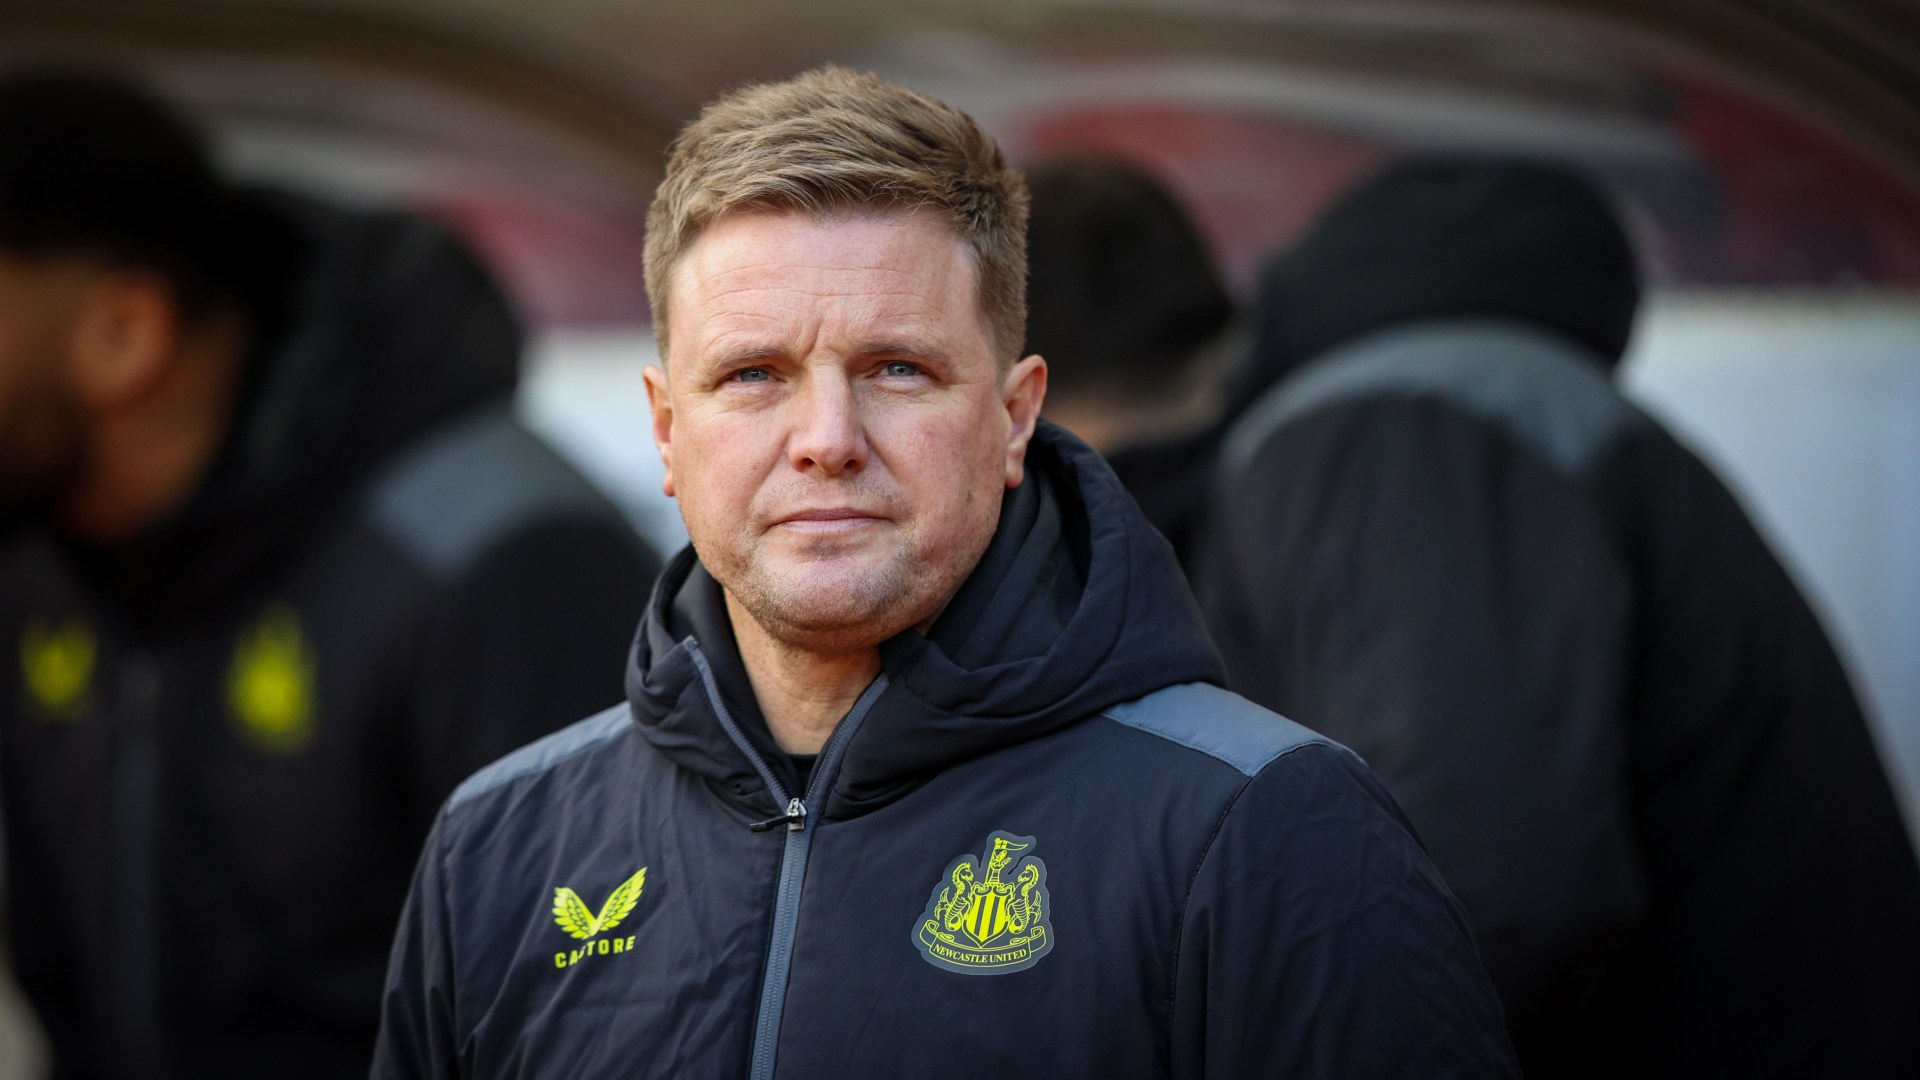 Newcastle have no money, no friends and next to no hope of signing anyone this January, reveals Eddie Howe